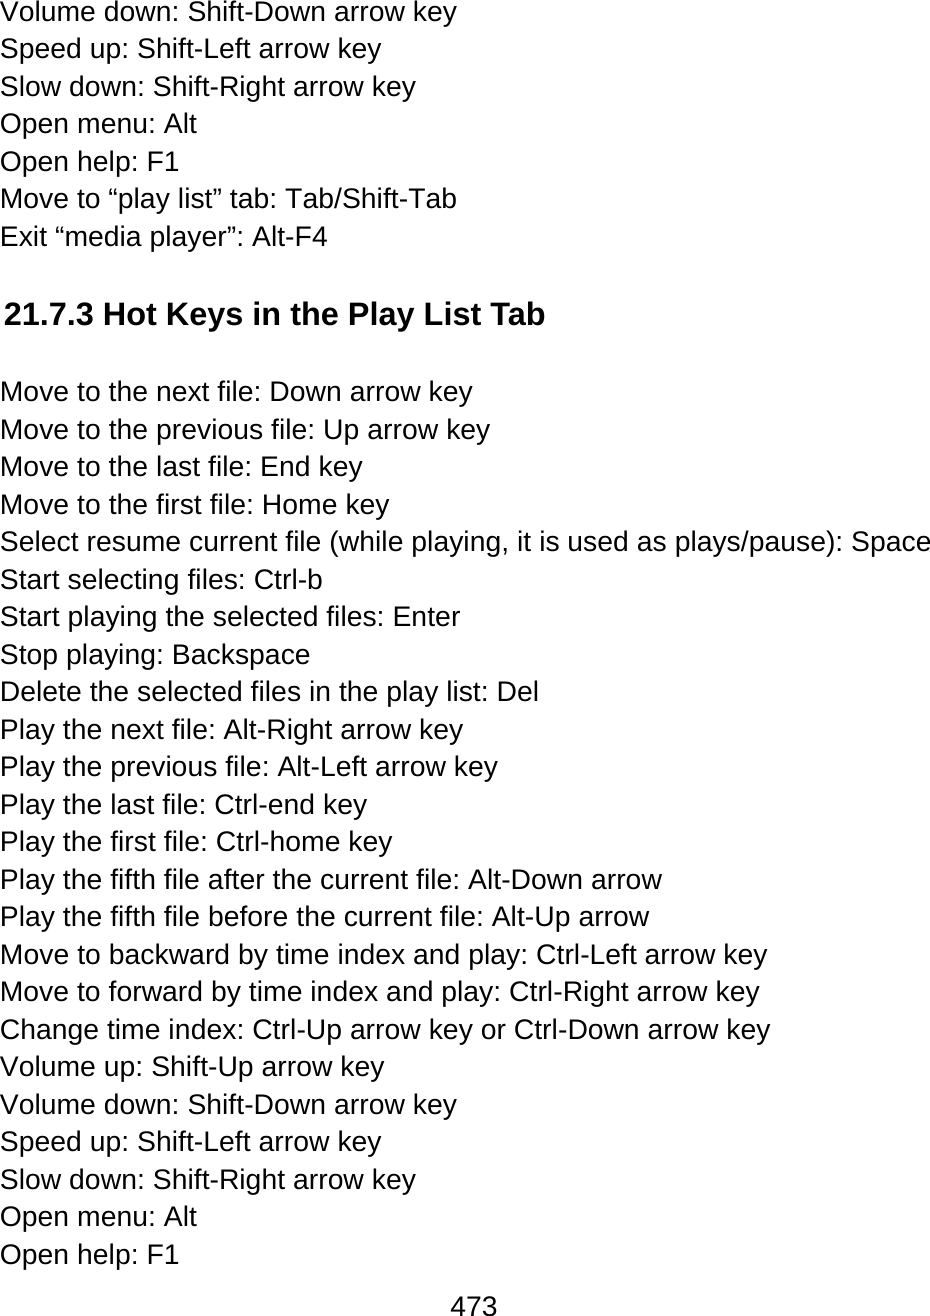 473  Volume down: Shift-Down arrow key Speed up: Shift-Left arrow key Slow down: Shift-Right arrow key Open menu: Alt Open help: F1 Move to “play list” tab: Tab/Shift-Tab Exit “media player”: Alt-F4  21.7.3 Hot Keys in the Play List Tab  Move to the next file: Down arrow key Move to the previous file: Up arrow key Move to the last file: End key Move to the first file: Home key Select resume current file (while playing, it is used as plays/pause): Space Start selecting files: Ctrl-b Start playing the selected files: Enter Stop playing: Backspace Delete the selected files in the play list: Del Play the next file: Alt-Right arrow key Play the previous file: Alt-Left arrow key Play the last file: Ctrl-end key Play the first file: Ctrl-home key Play the fifth file after the current file: Alt-Down arrow Play the fifth file before the current file: Alt-Up arrow Move to backward by time index and play: Ctrl-Left arrow key Move to forward by time index and play: Ctrl-Right arrow key Change time index: Ctrl-Up arrow key or Ctrl-Down arrow key Volume up: Shift-Up arrow key Volume down: Shift-Down arrow key Speed up: Shift-Left arrow key Slow down: Shift-Right arrow key Open menu: Alt Open help: F1 